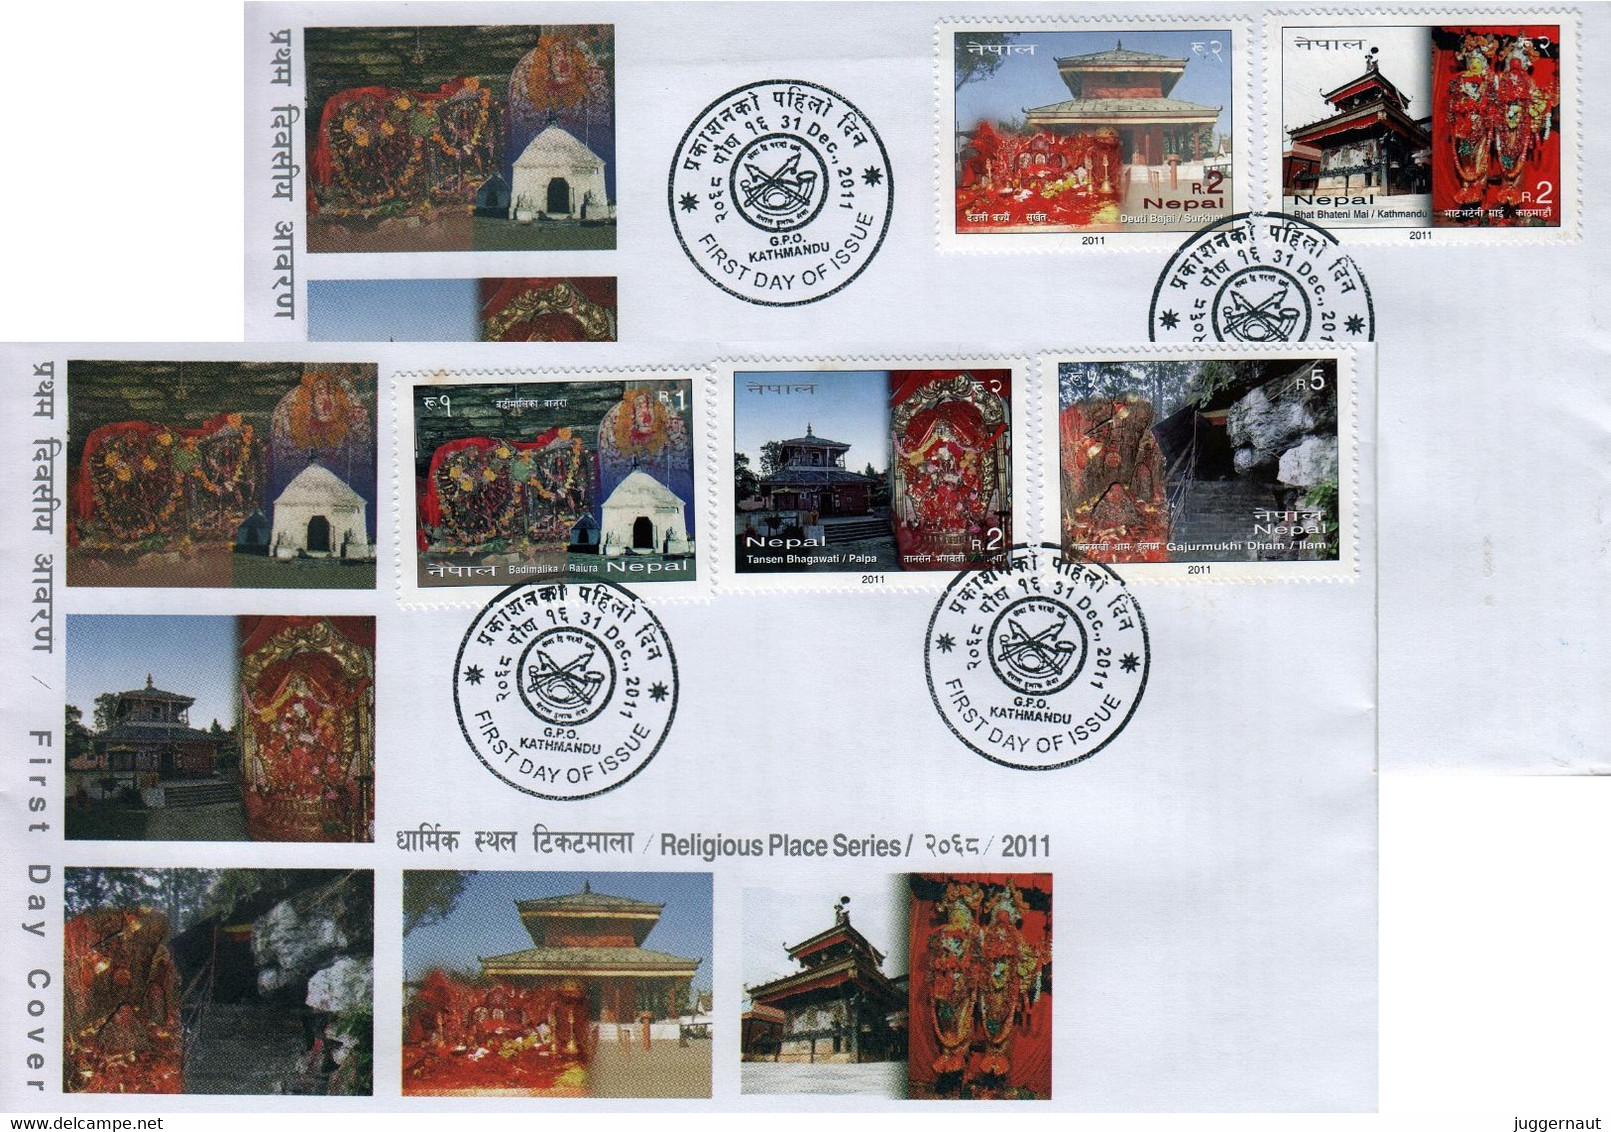 TEMPLE Series 2-SET FDC 2011 NEPAL - Hinduism